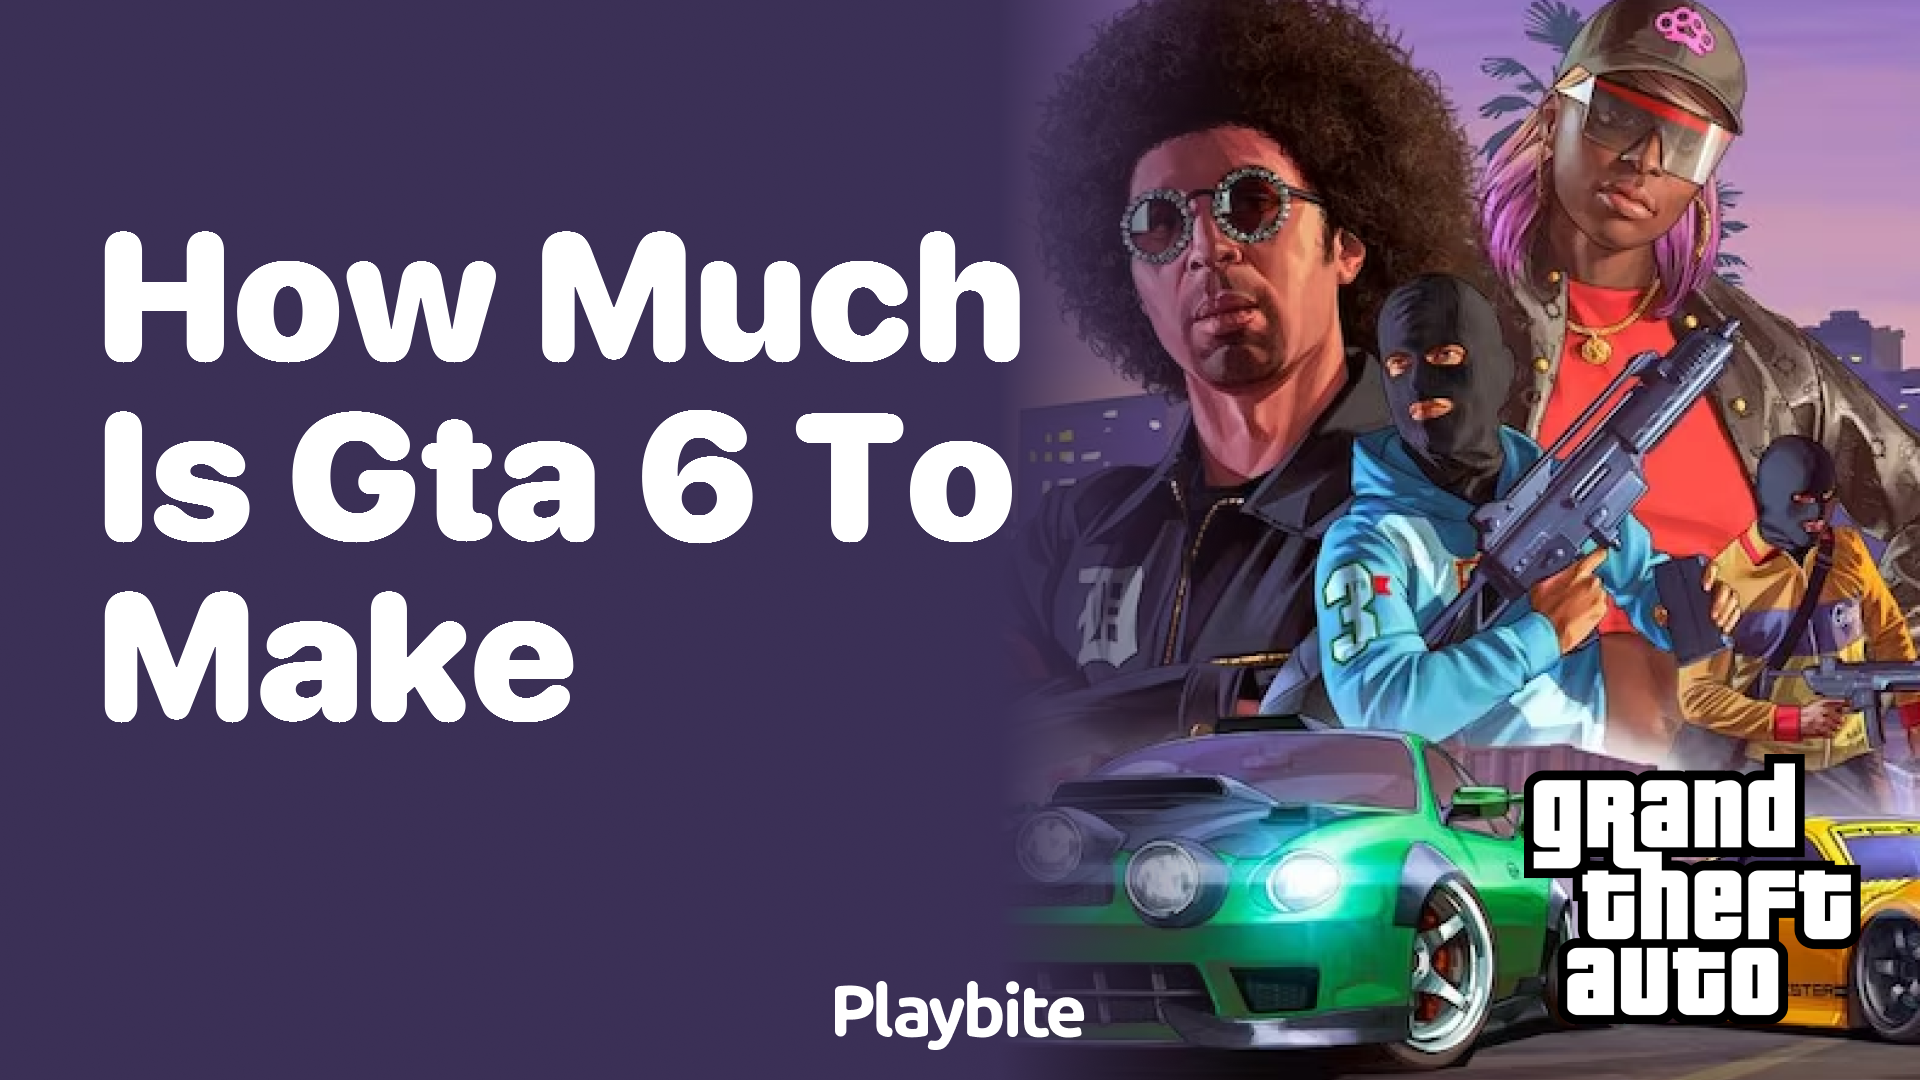 How much is GTA 6 to make?